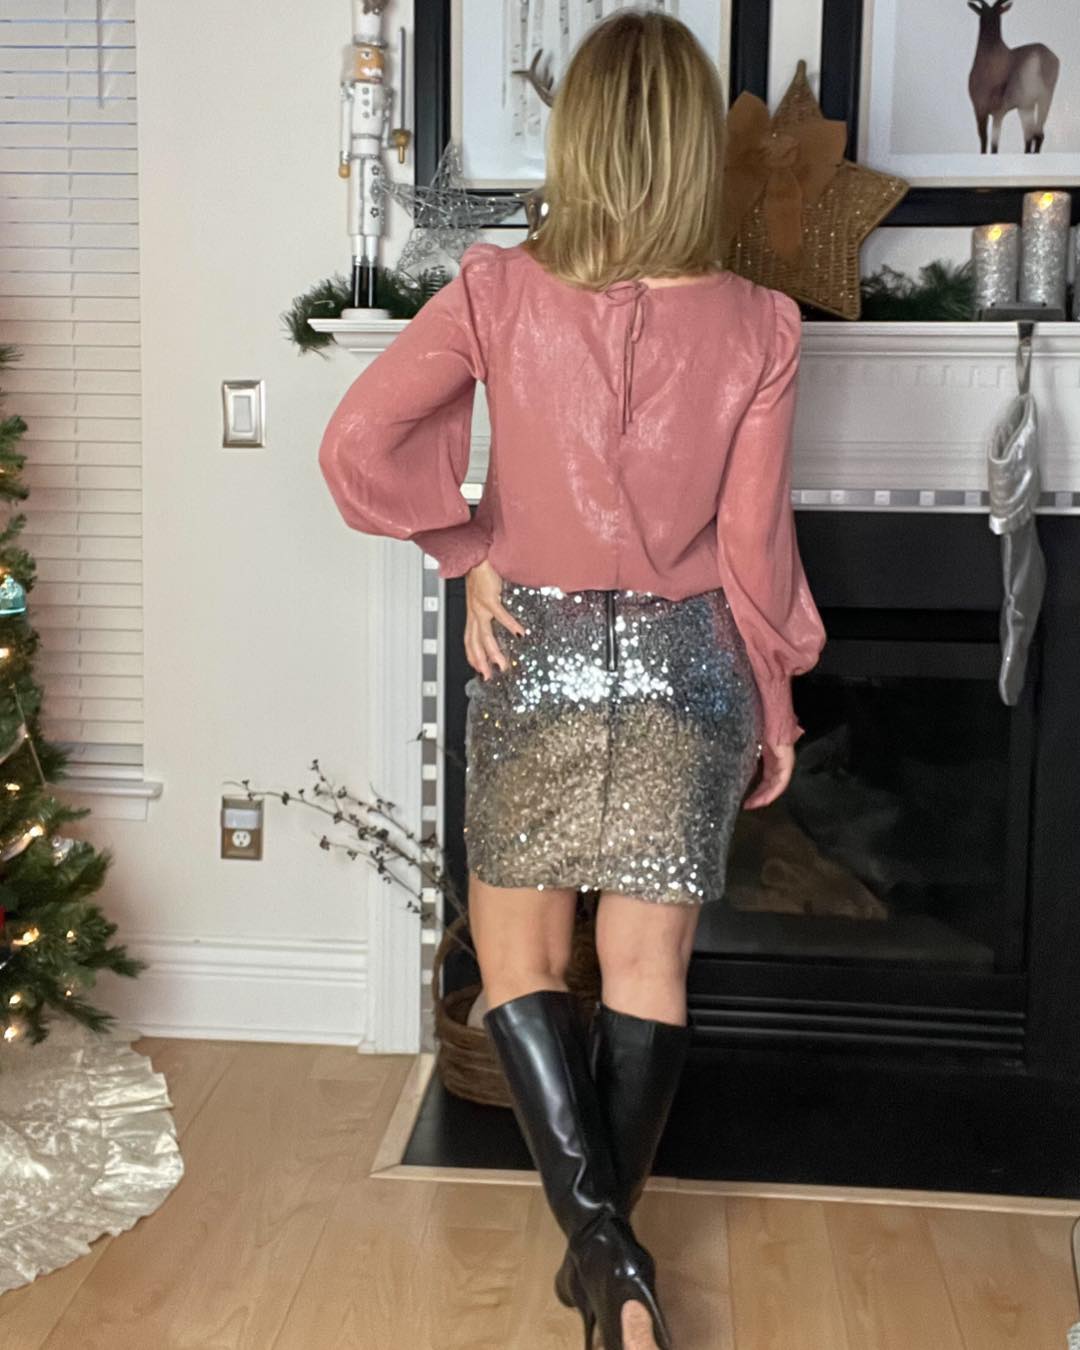 3 Festive Outfits to Wear Over the Holiday Season